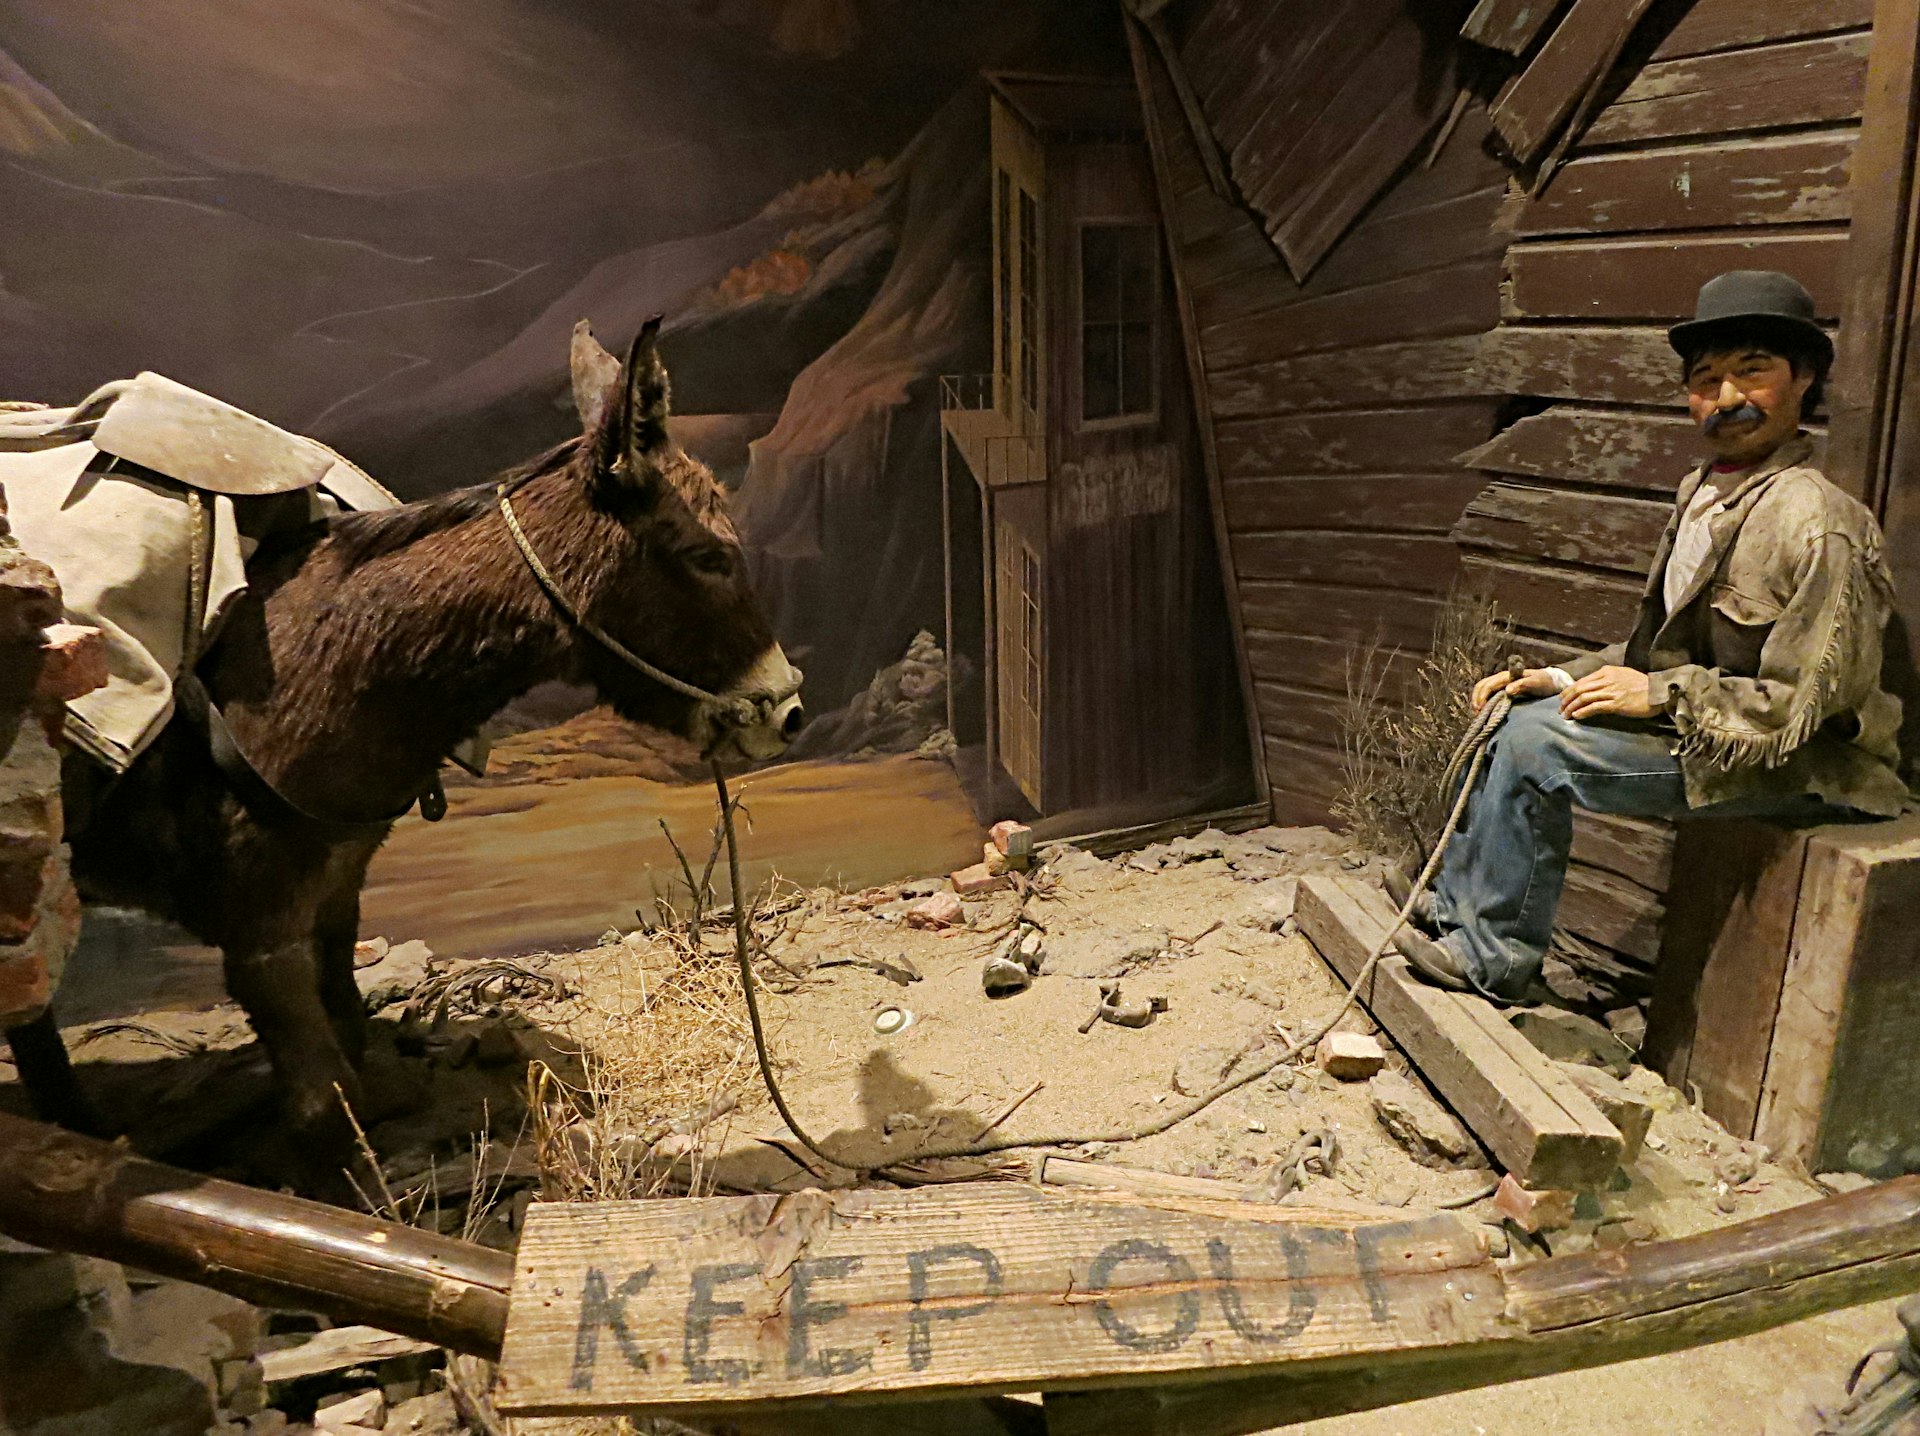 Nevada State Museum houses a series of exhibits on the state's history, including reconstructions of mining communities. Image by Clifton Wilkinson / Lonely Planet